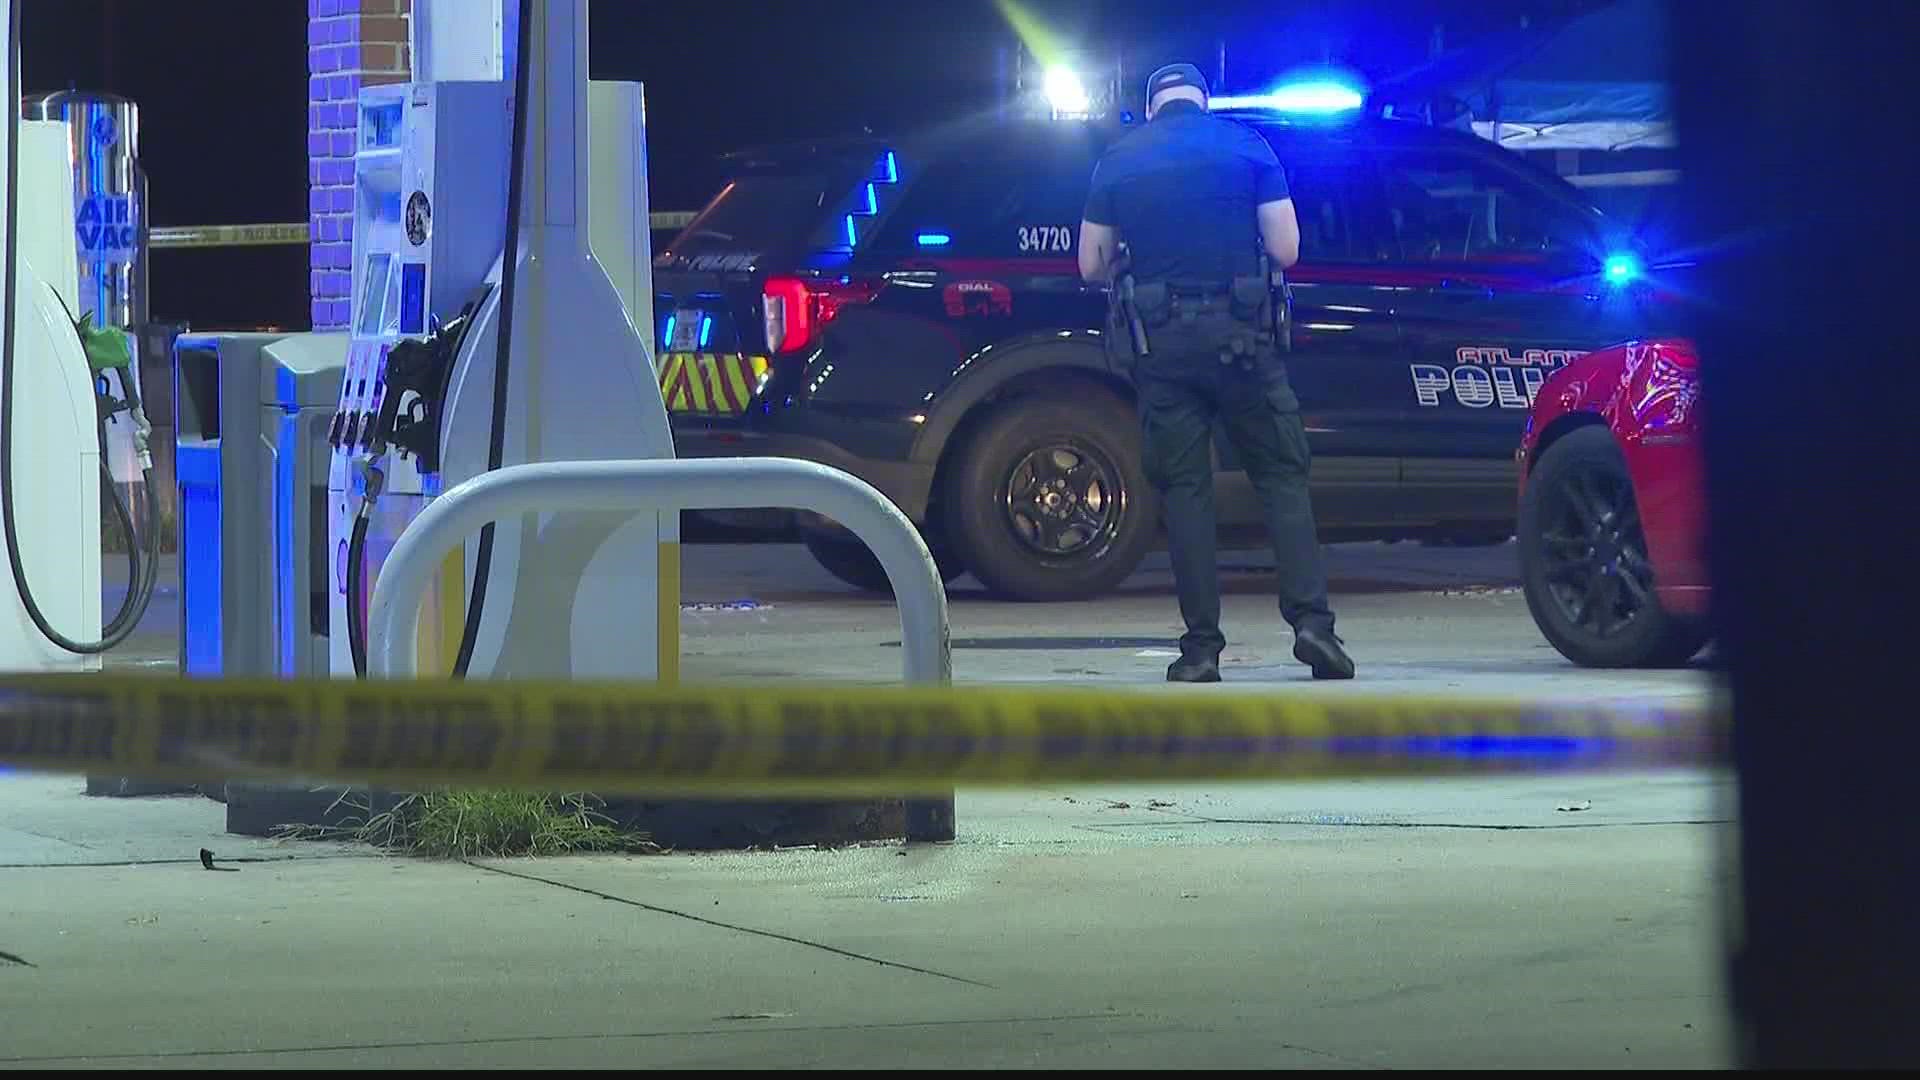 It happened around 12:45 a.m. Sunday at the Shell gas station next to the Diamond Club off Northside Drive near Interstate 75.